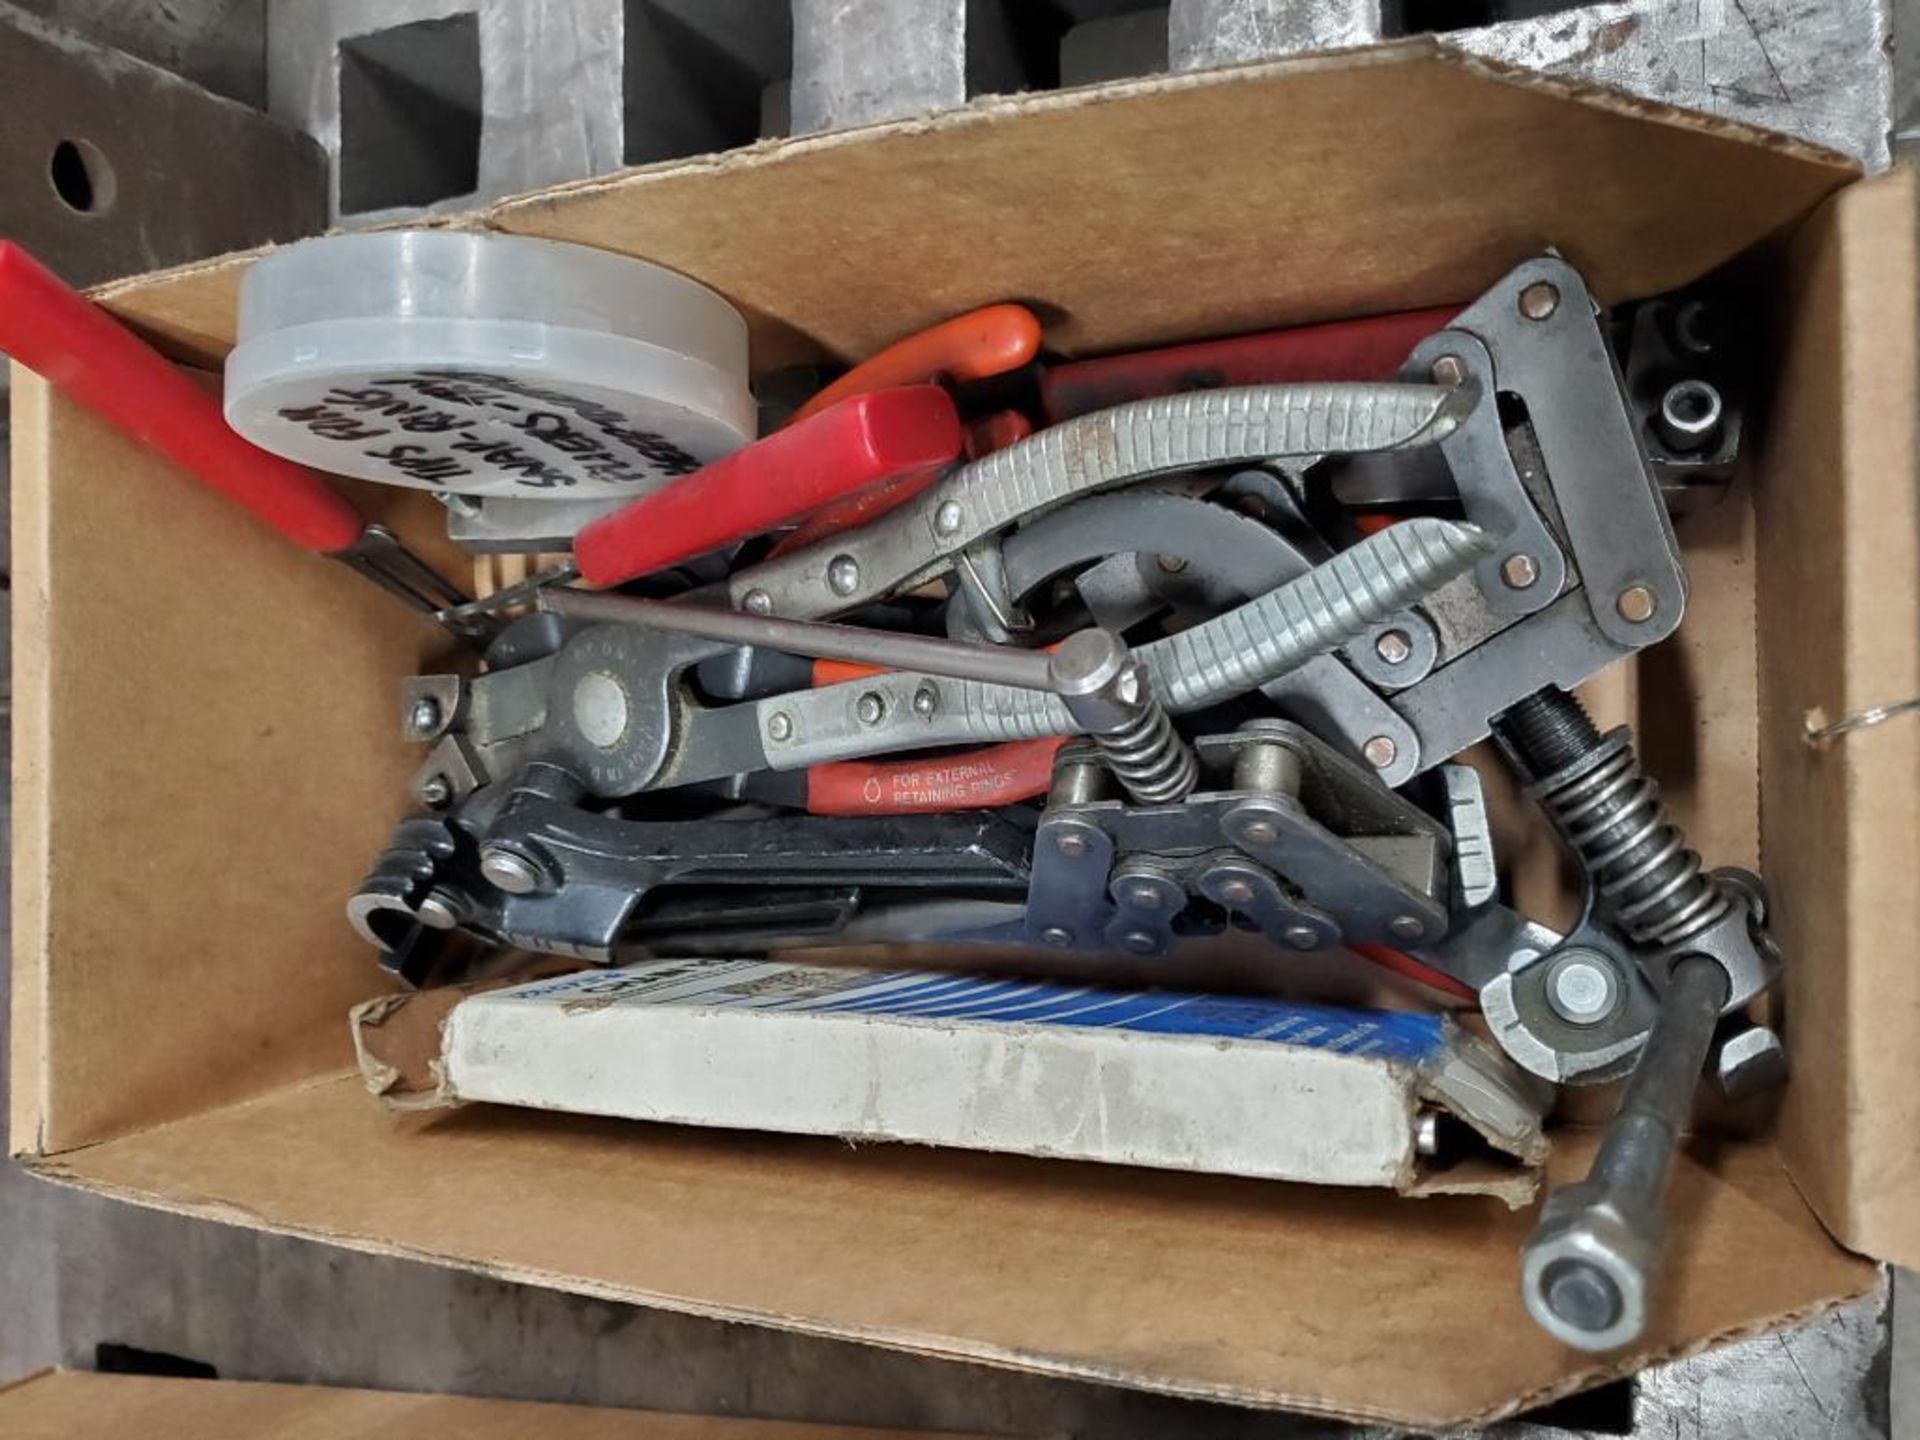 Box of Chain Repair Wrenches, Chain, & Clamp Fixtures